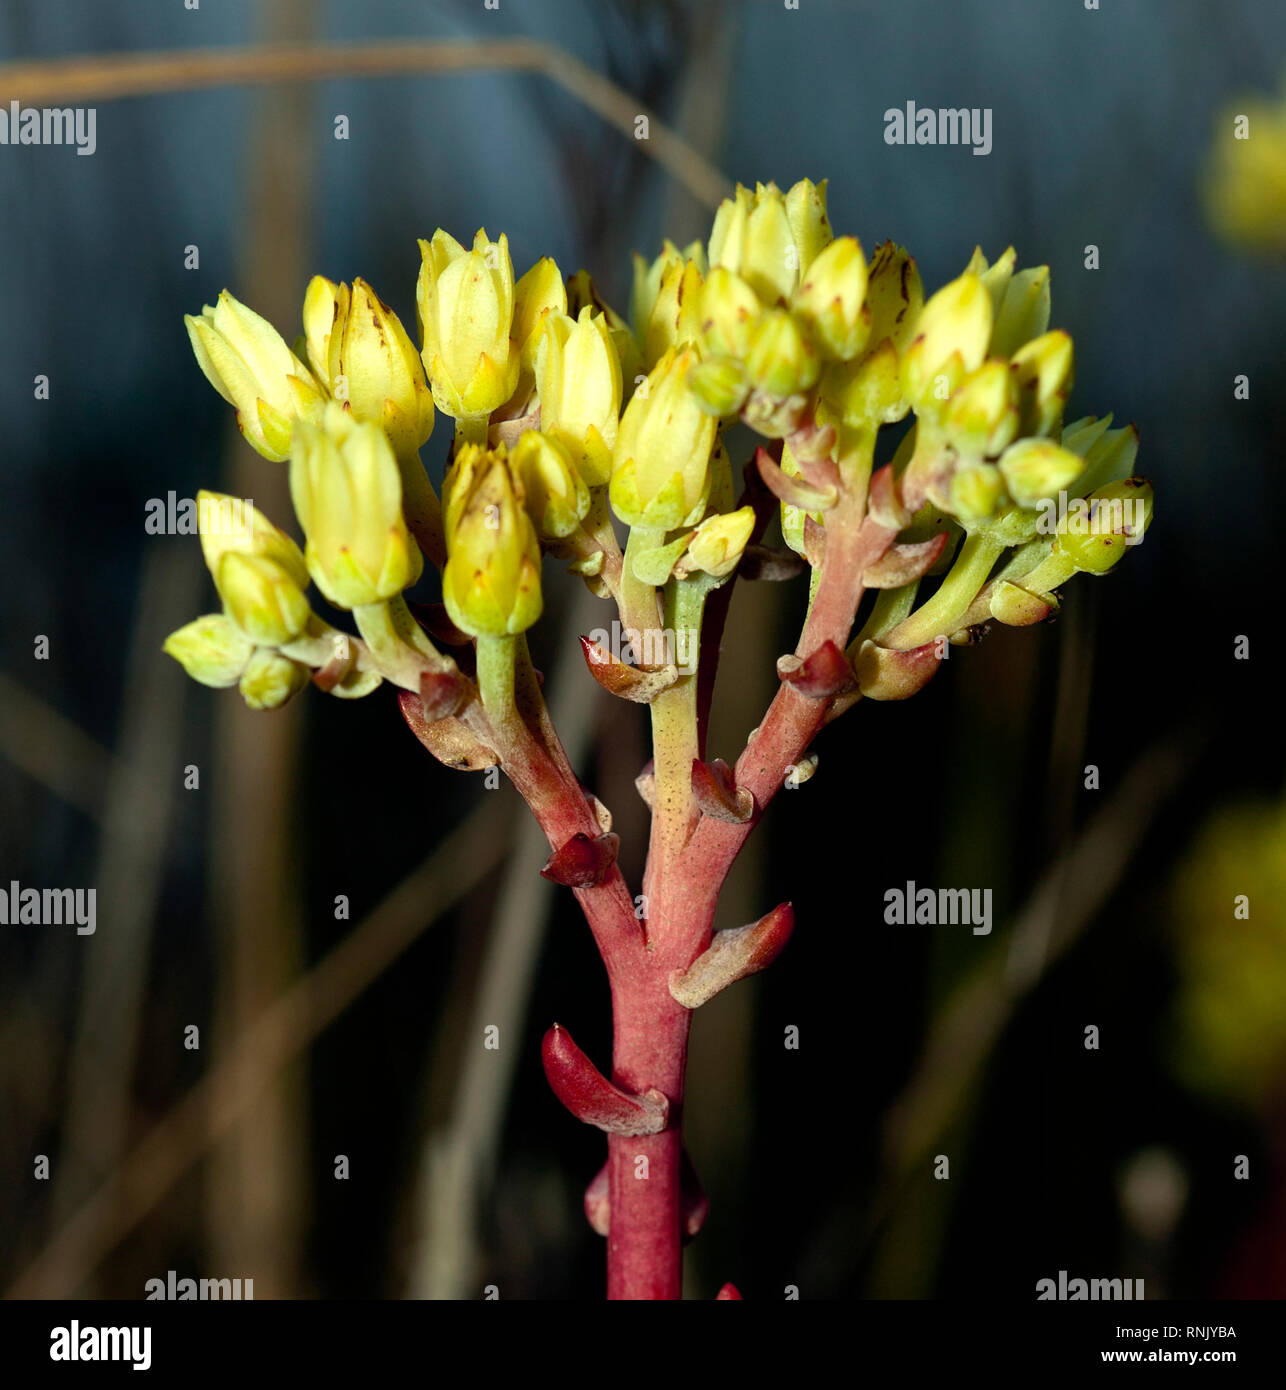 Dudleya Farinosa, a species of succulent illegally harvested in the West for export. Stock Photo